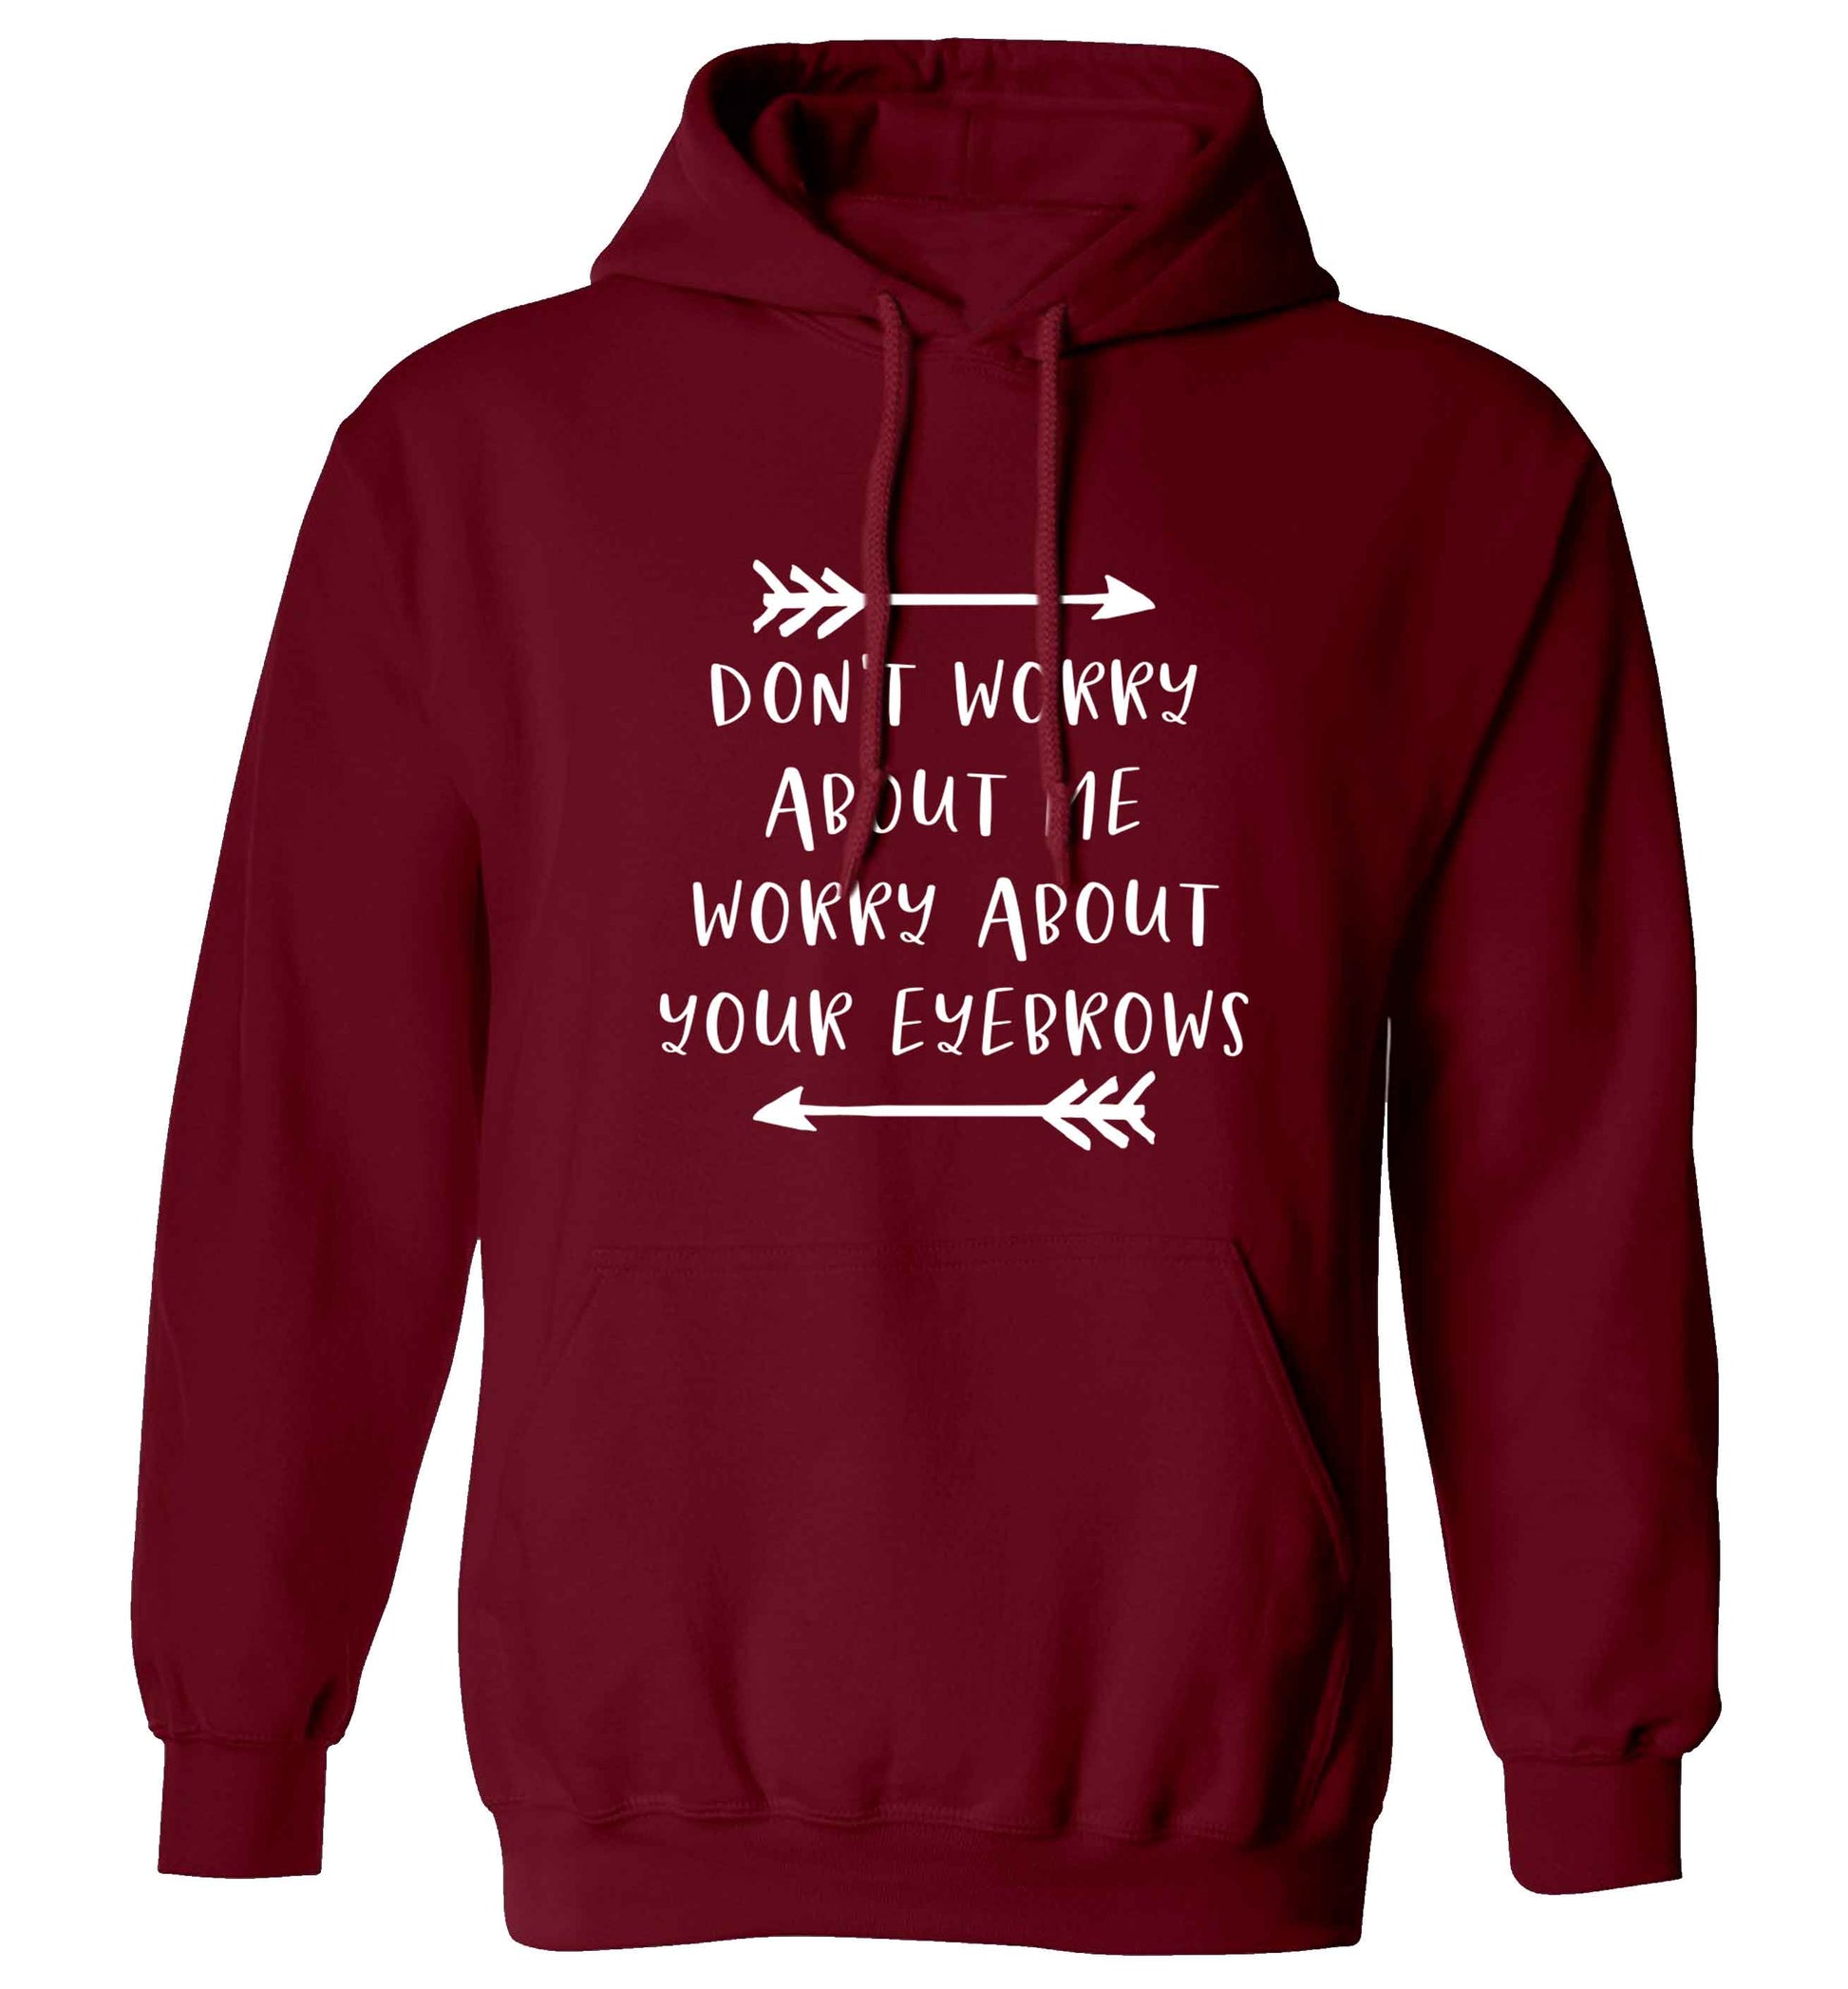 Don't worry about me worry about your eyebrows adults unisex maroon hoodie 2XL